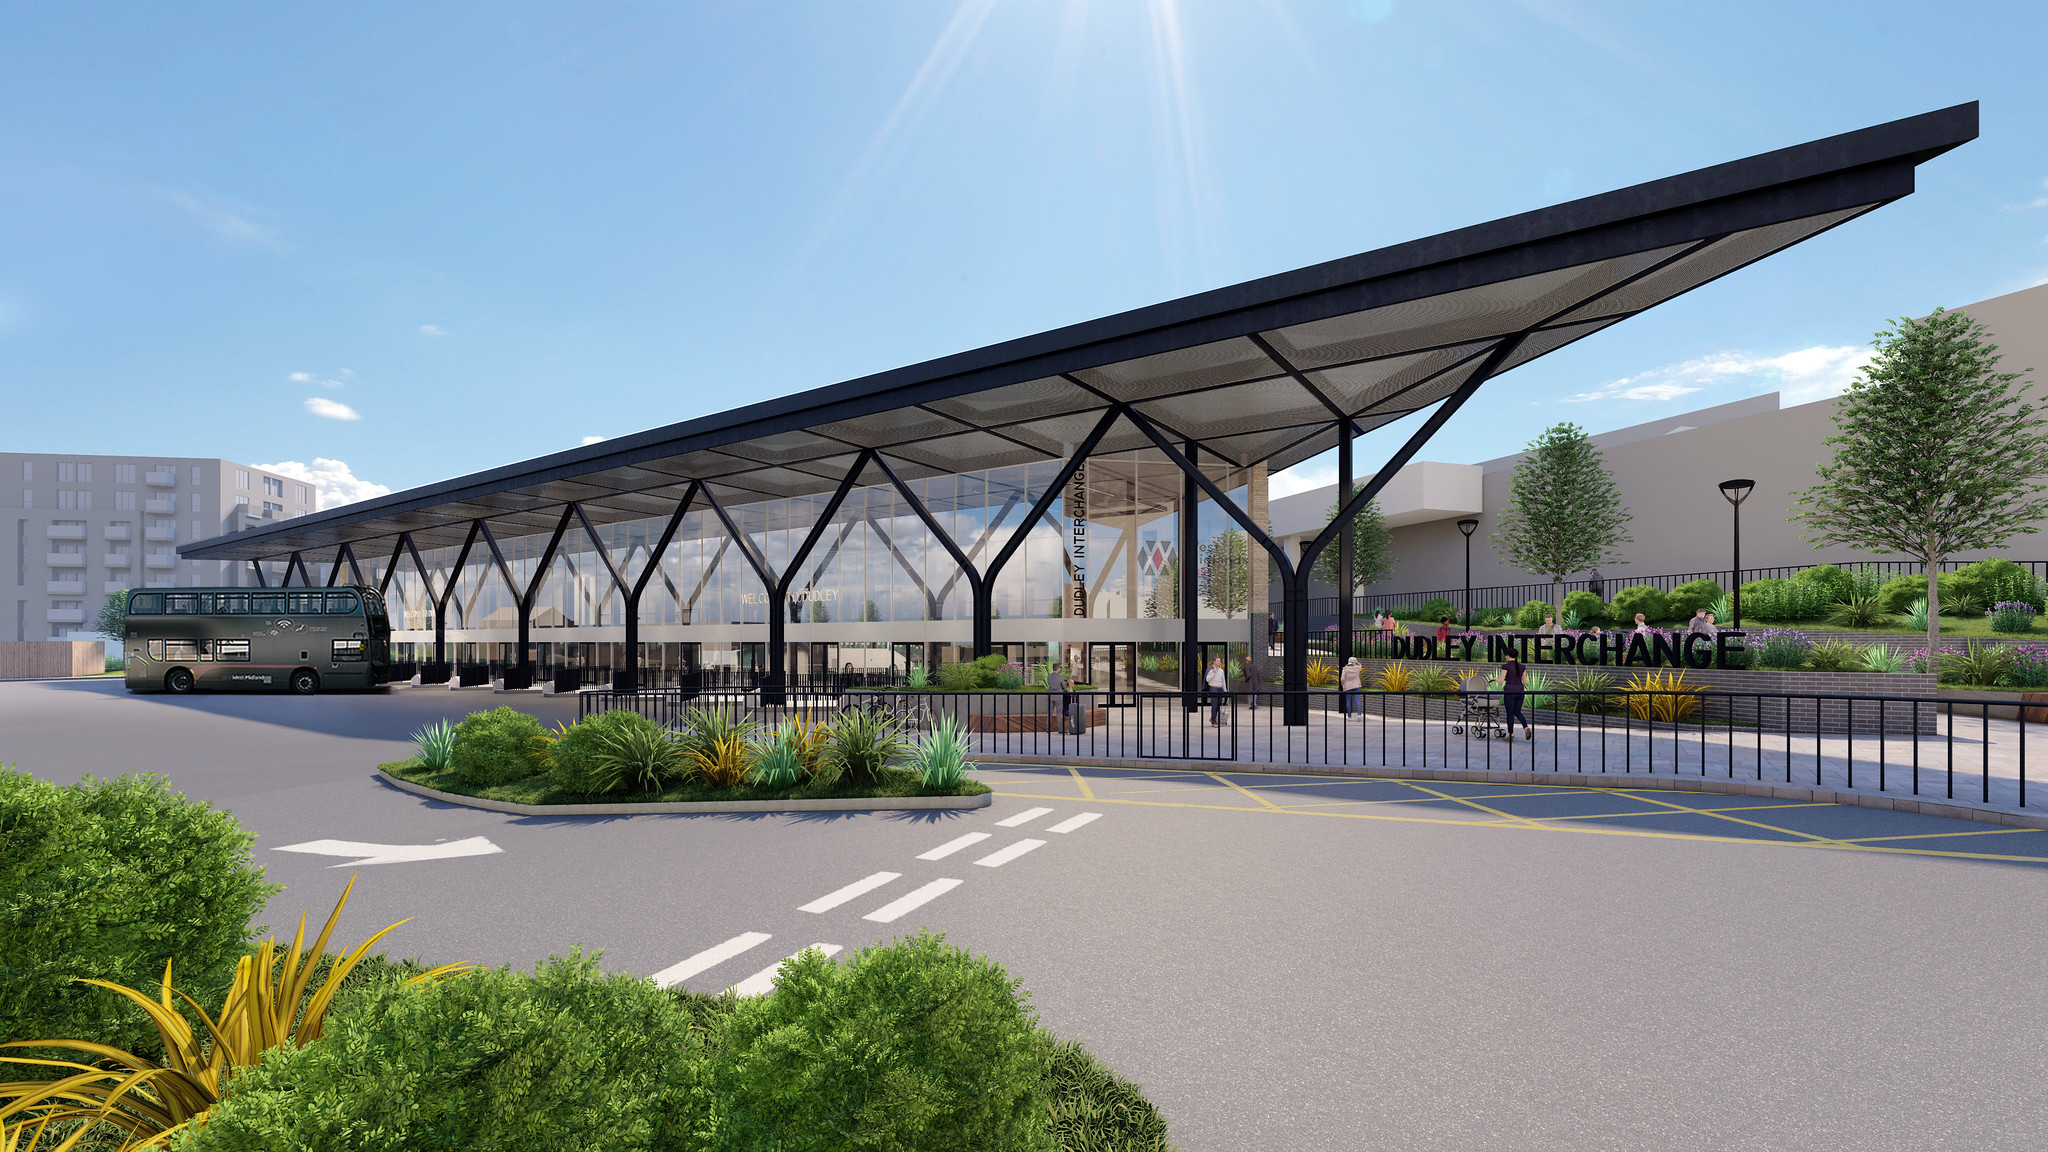 Design image of Dudley Interchange showing large canopy with bus parked outside